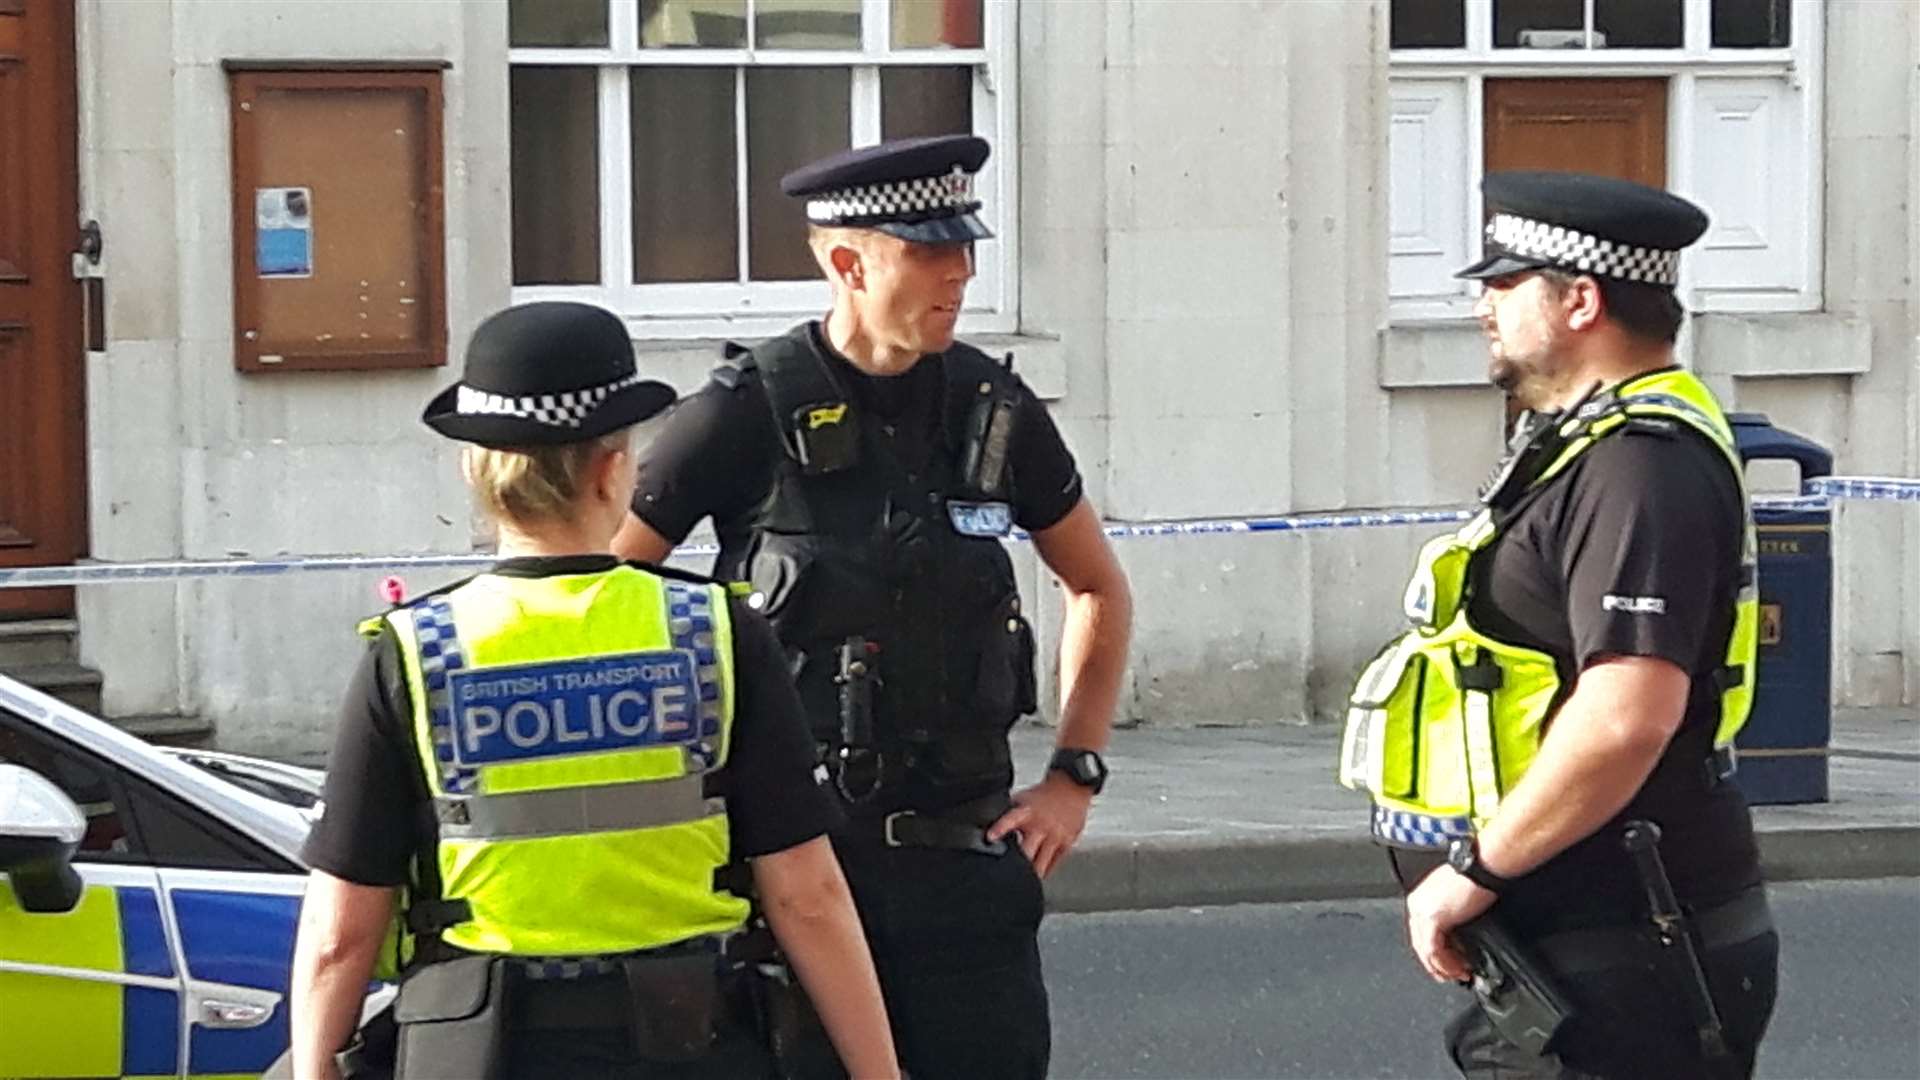 Police at the scene in Maidtsone town centre (15708428)